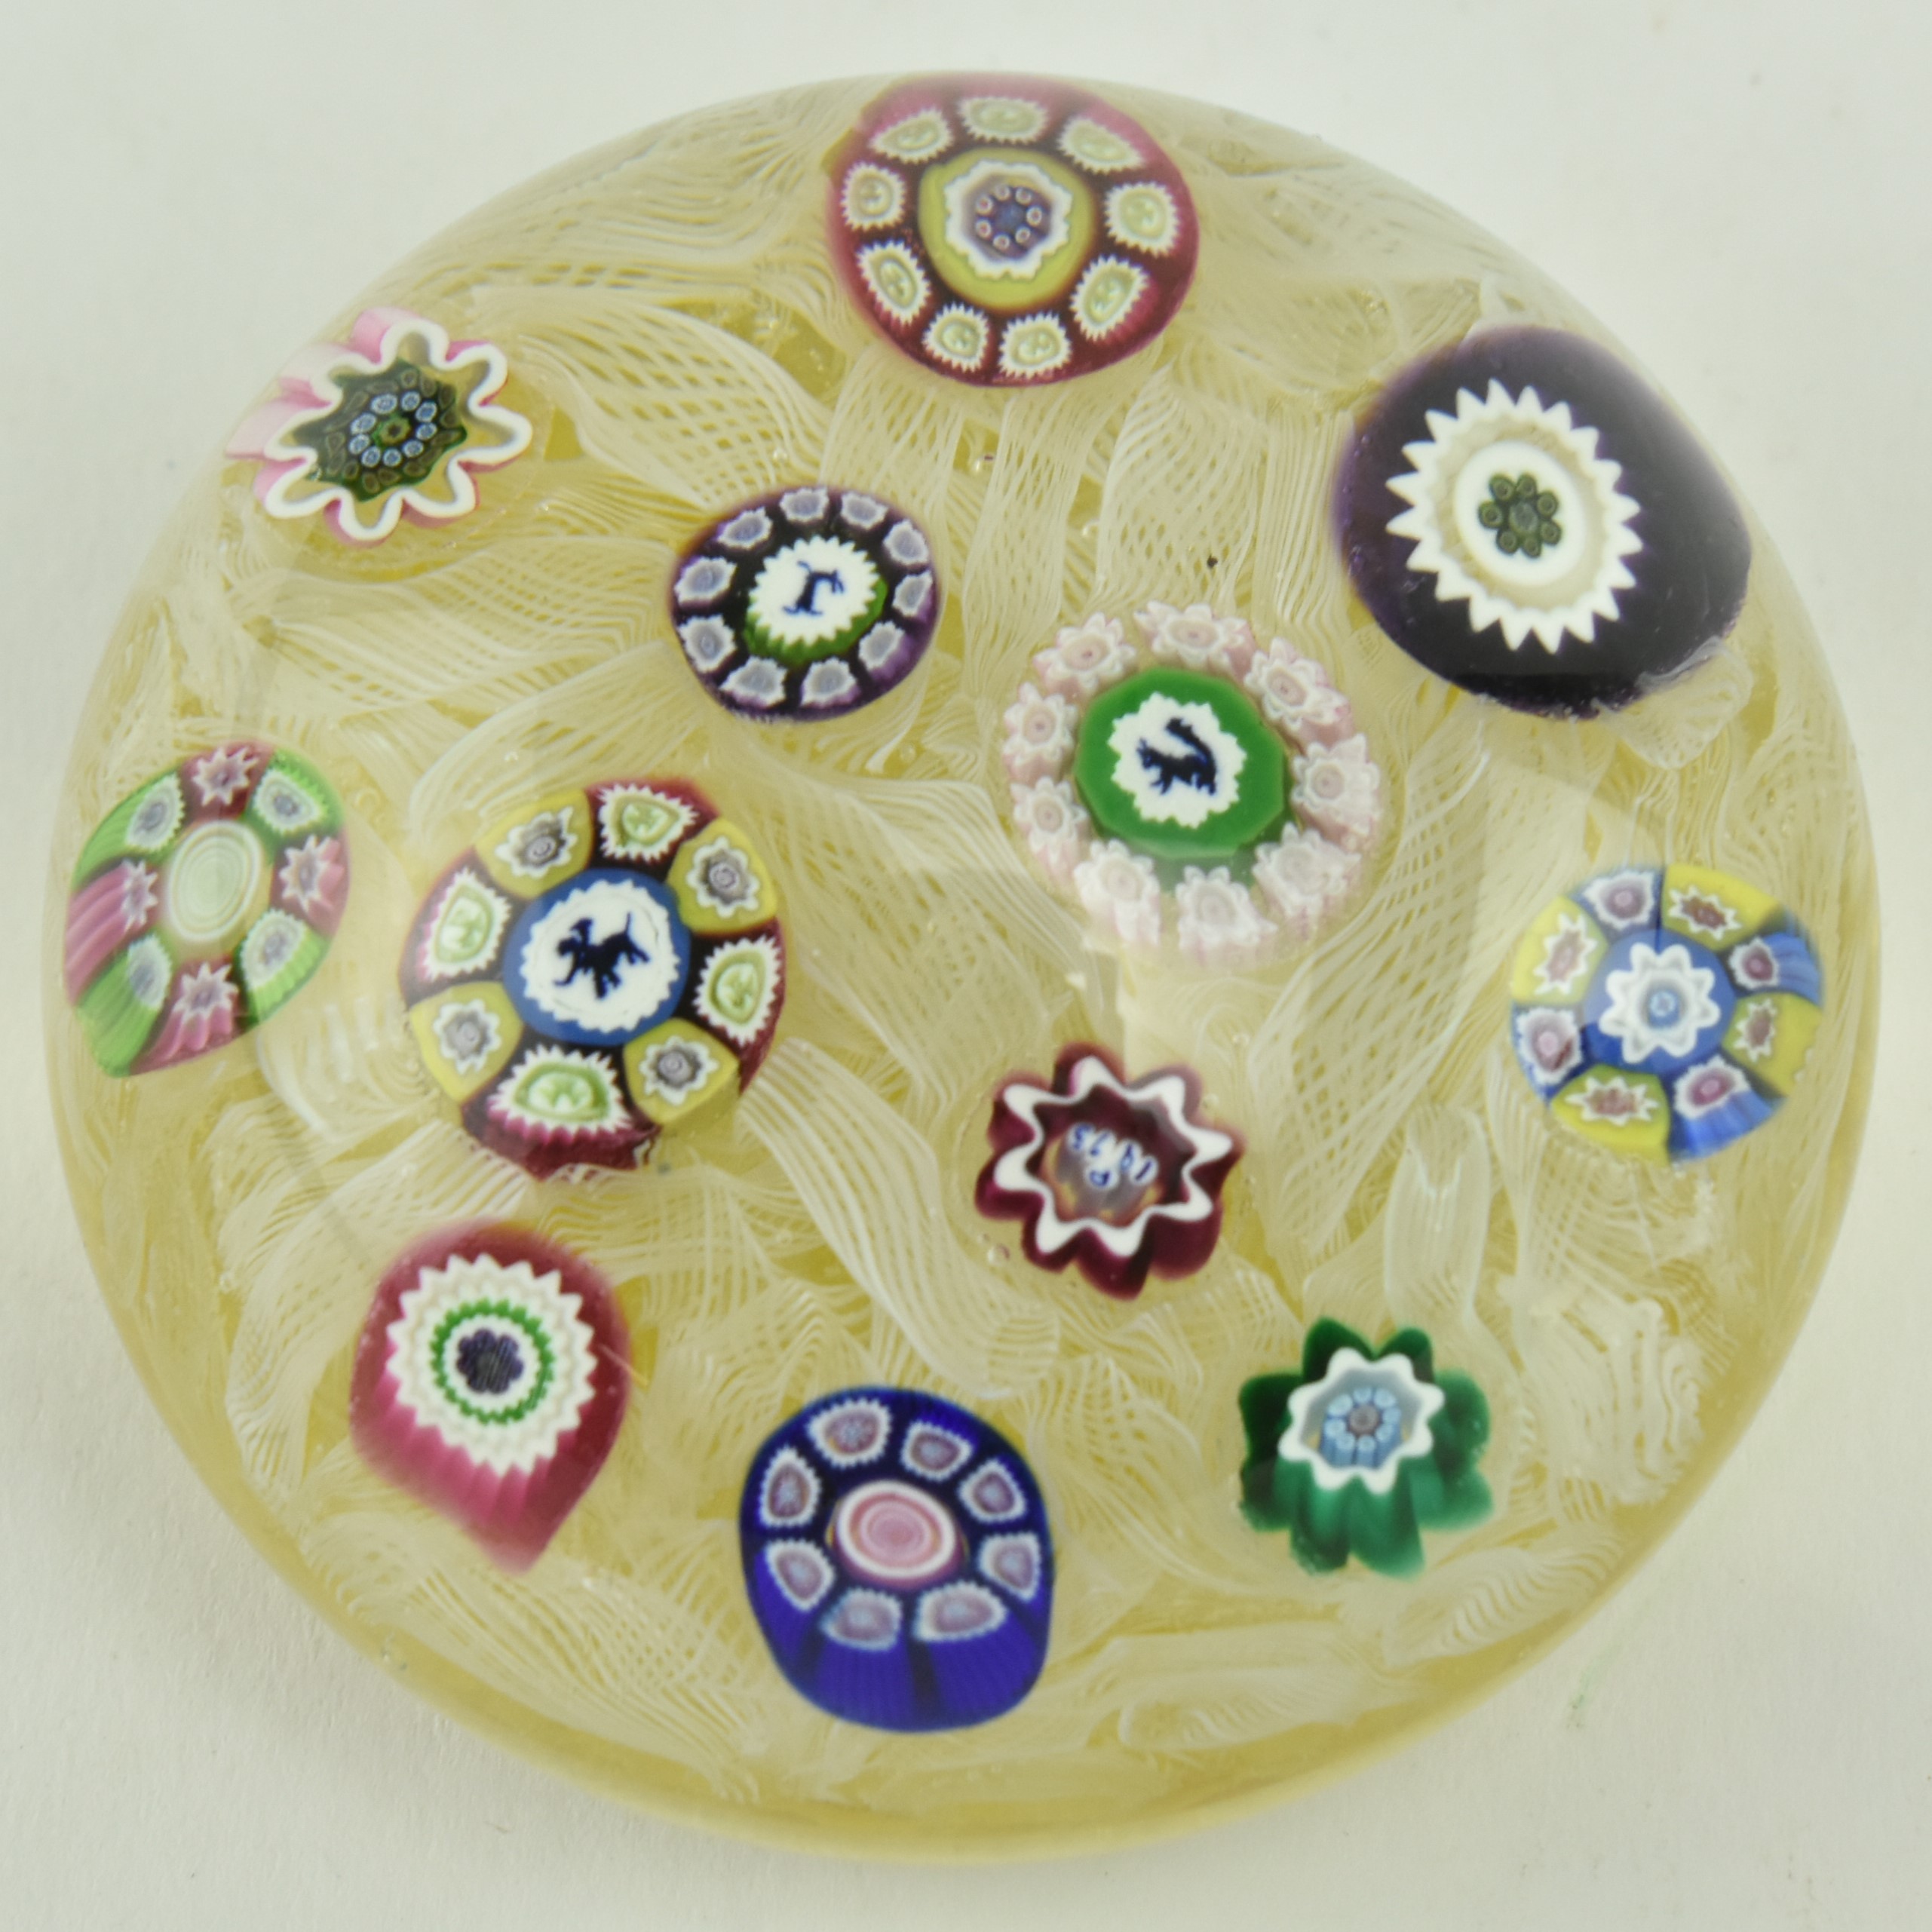 THREE VINTAGE GLASS PAPERWEIGHTS INCL. PERTHSHIRE - Image 3 of 6